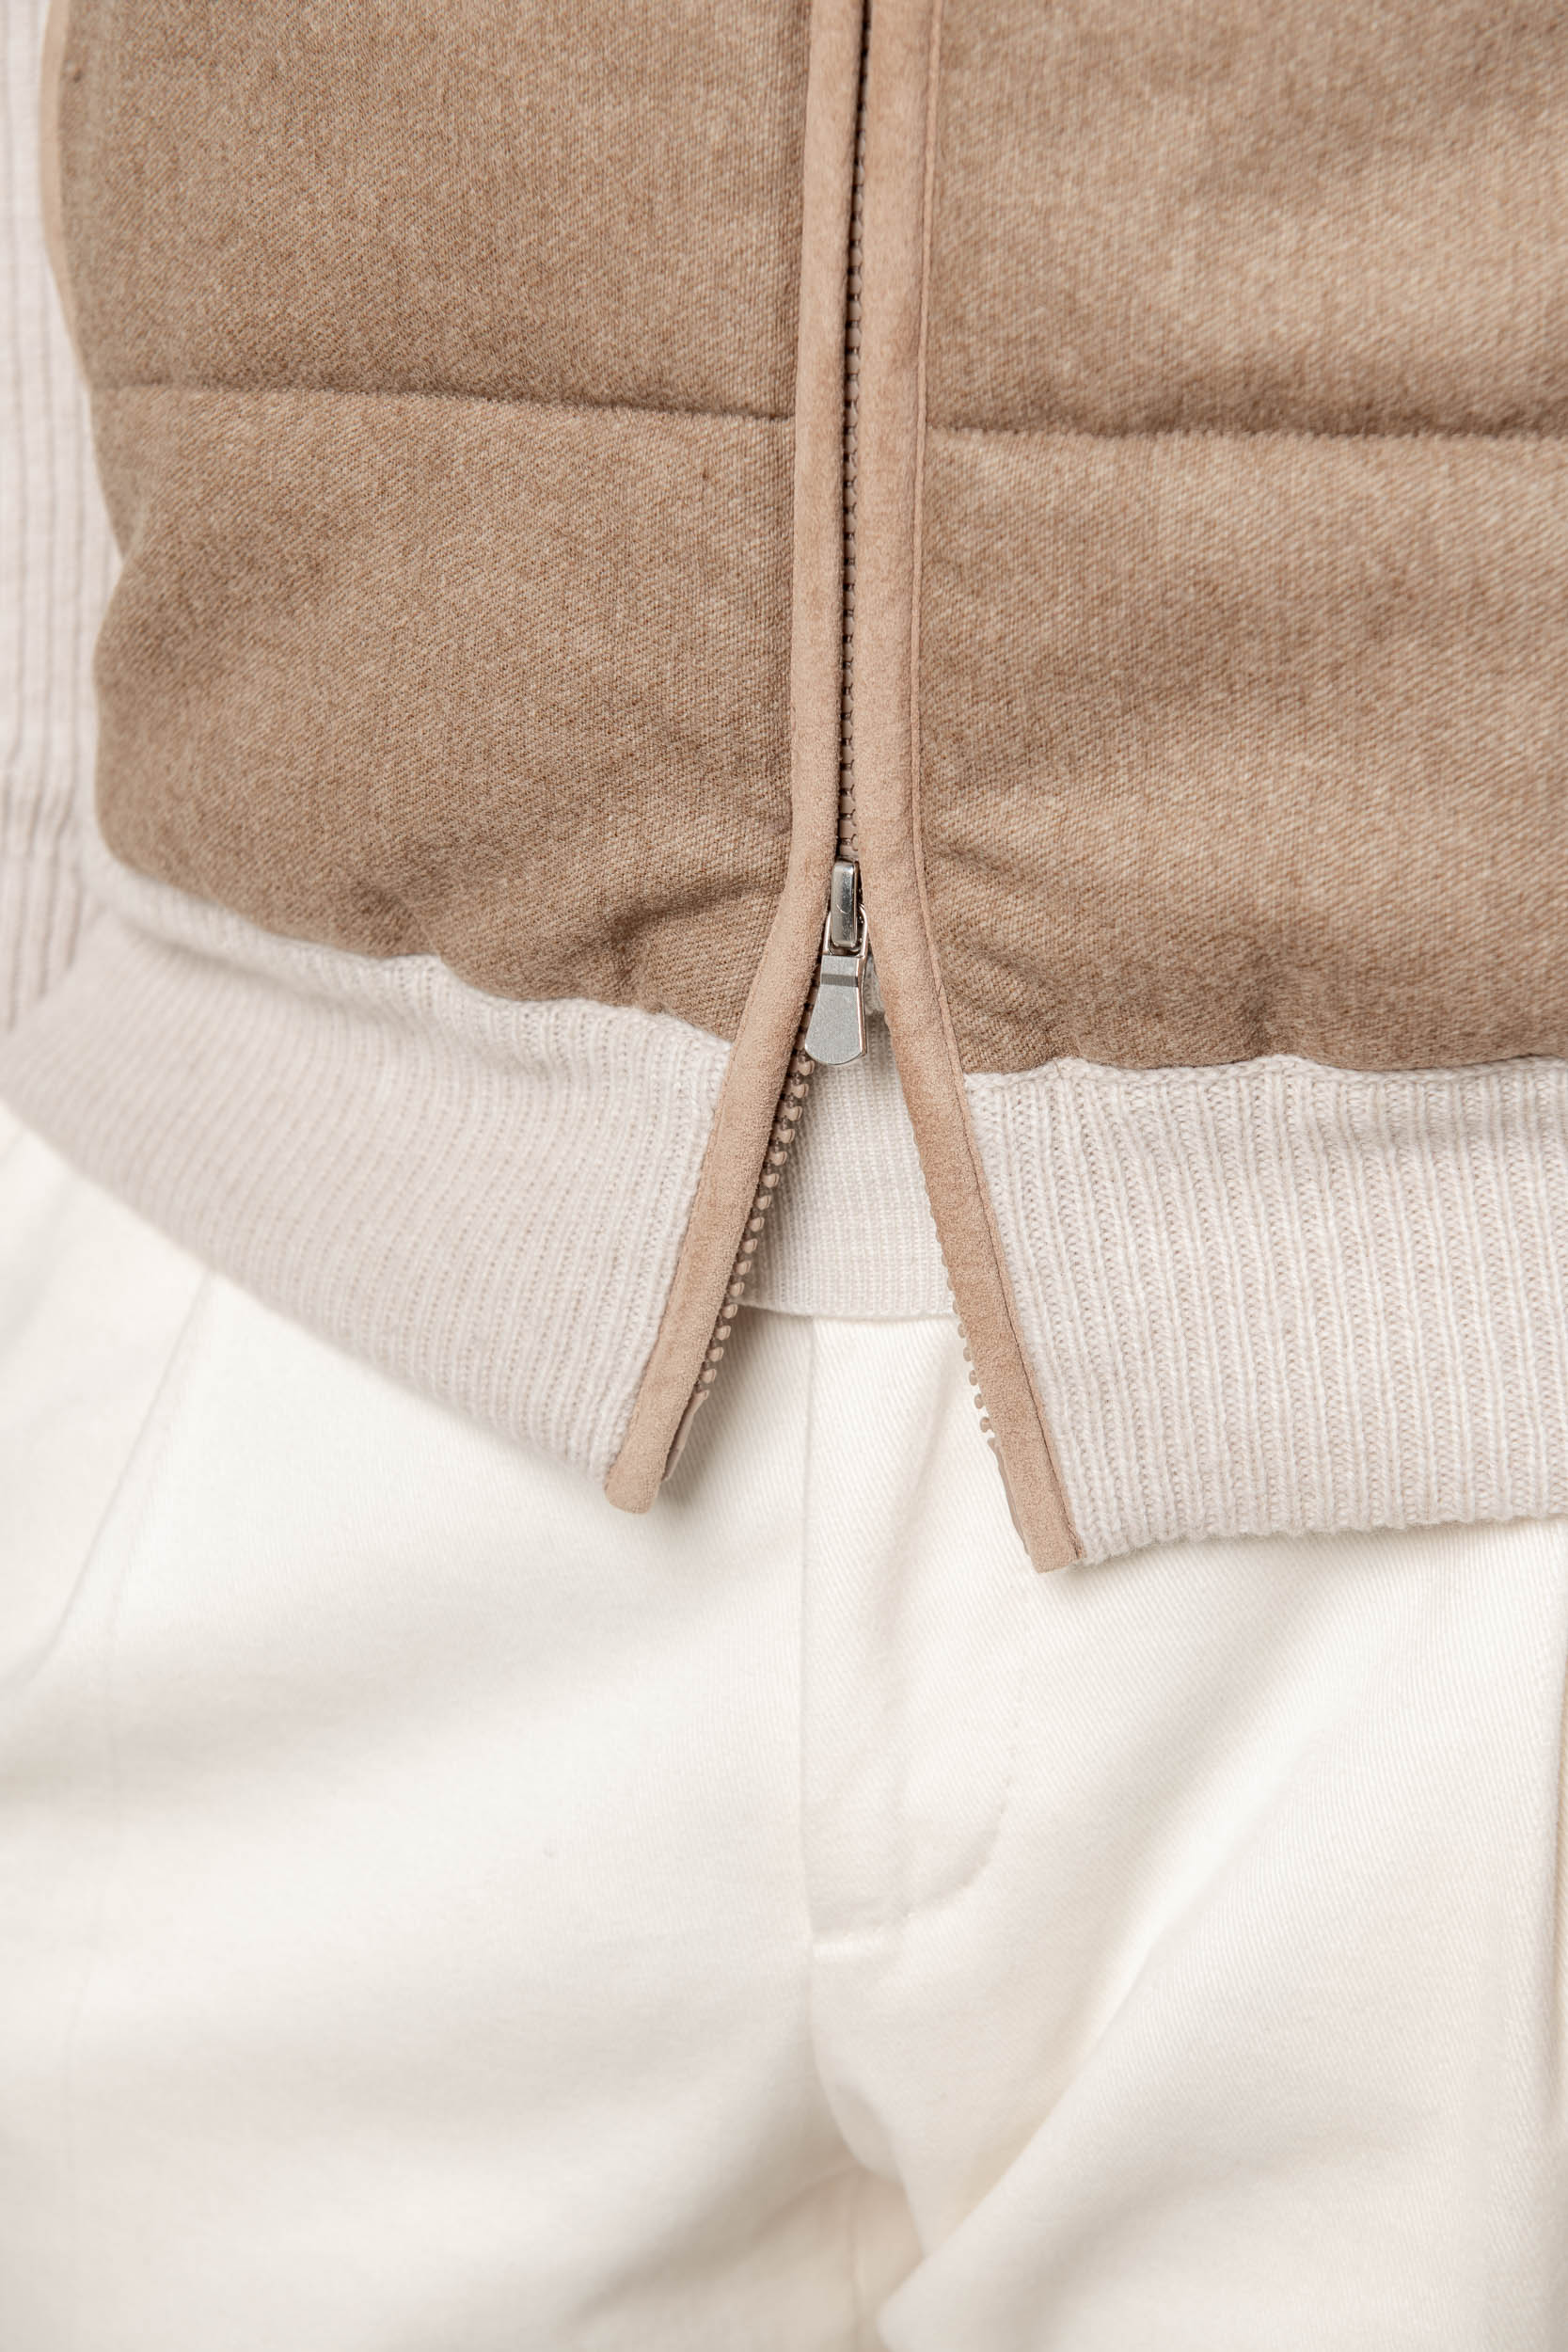 Beige cardigan - flannel & knitted wool - Made in Italy